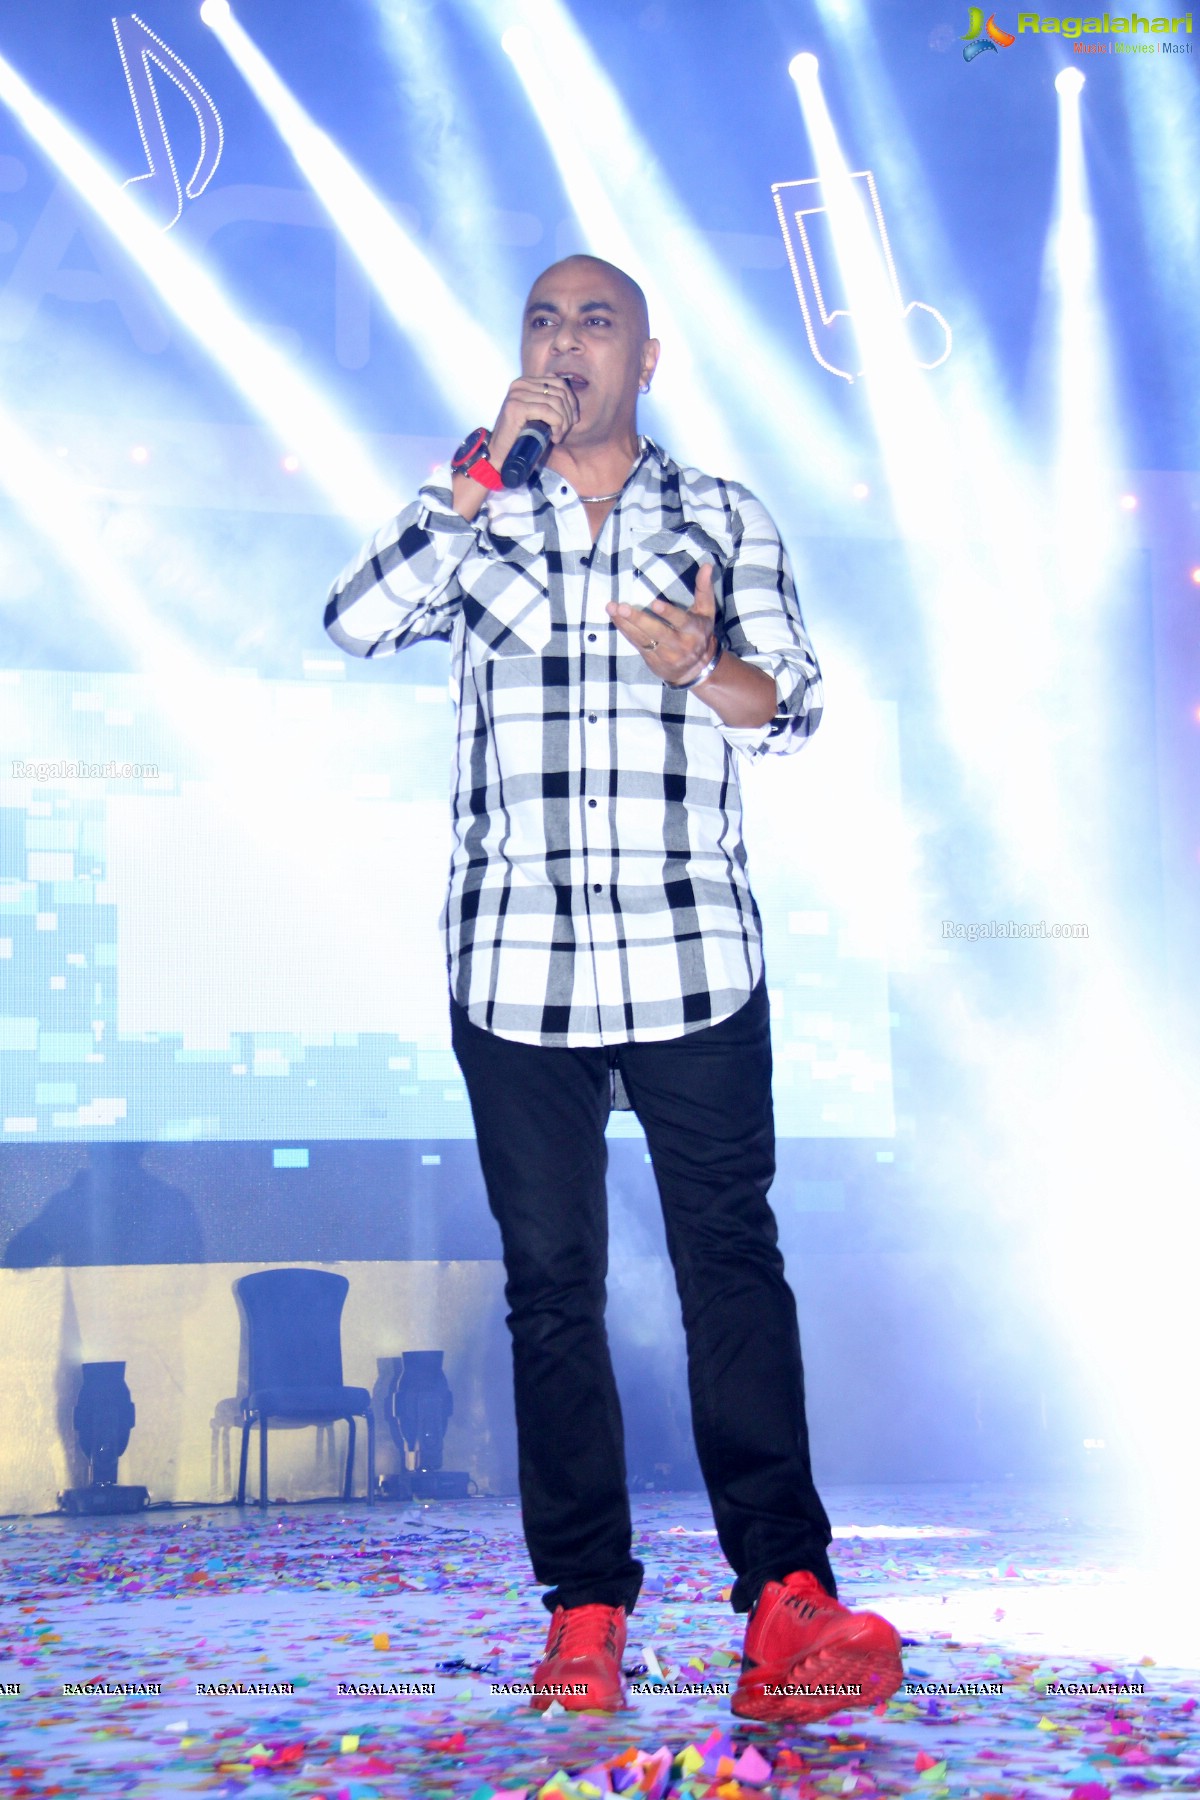 FactSet Annual Day - Baba Sehgal performs, and several employees pledge their eyes during the event